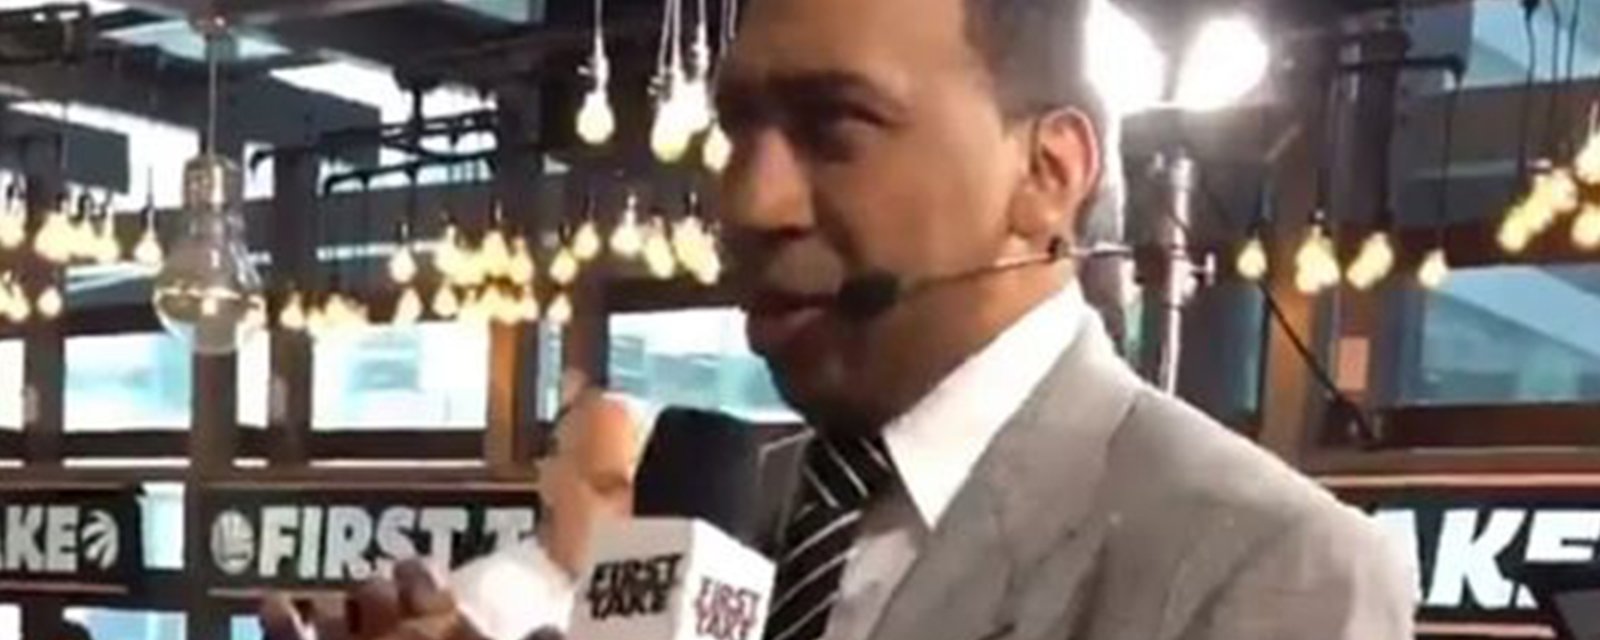 ESPN analyst Stephen A. Smith slams Canadian media for Stanley Cup Final coverage over Toronto Raptors